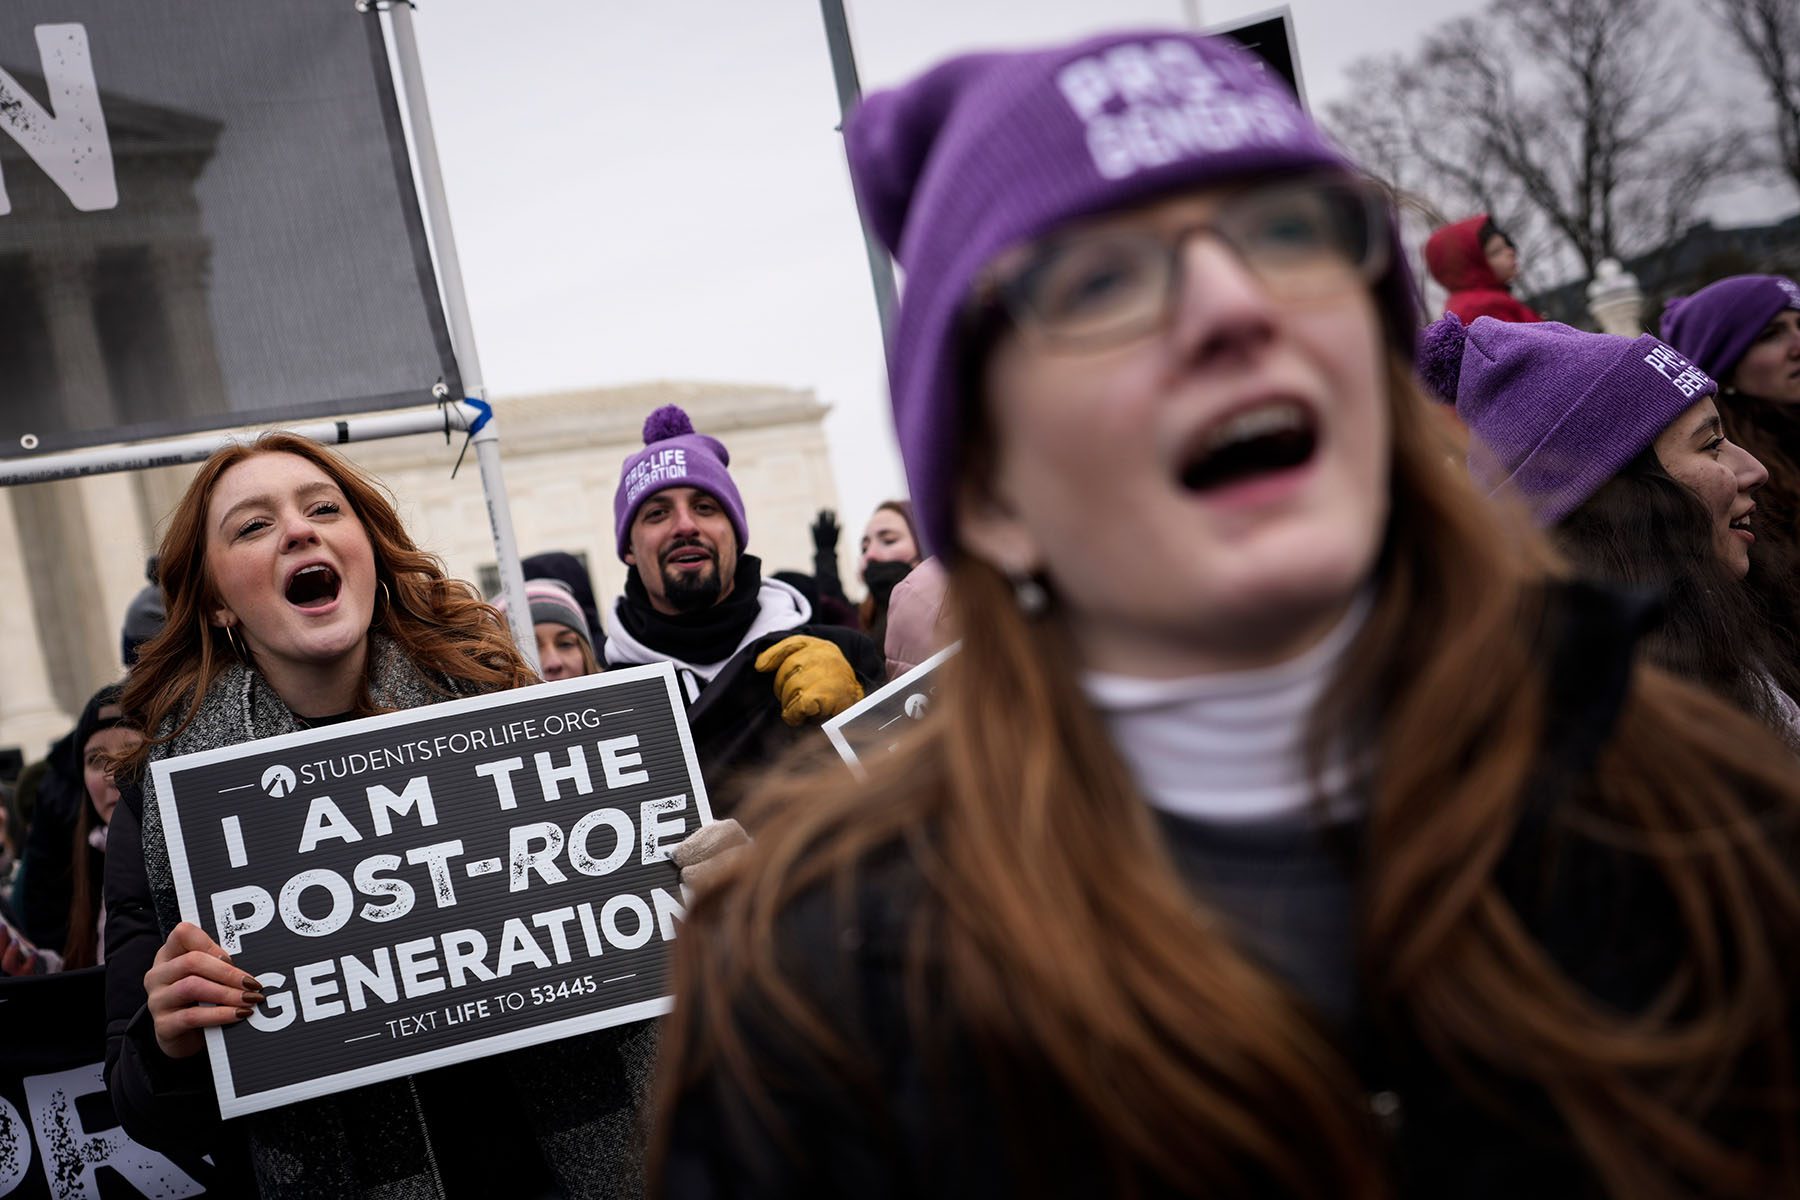 Anti-abortion activists rally outside the Supreme Court. One person holds a sign that reads "I AM THE POST-ROE GENERATION."